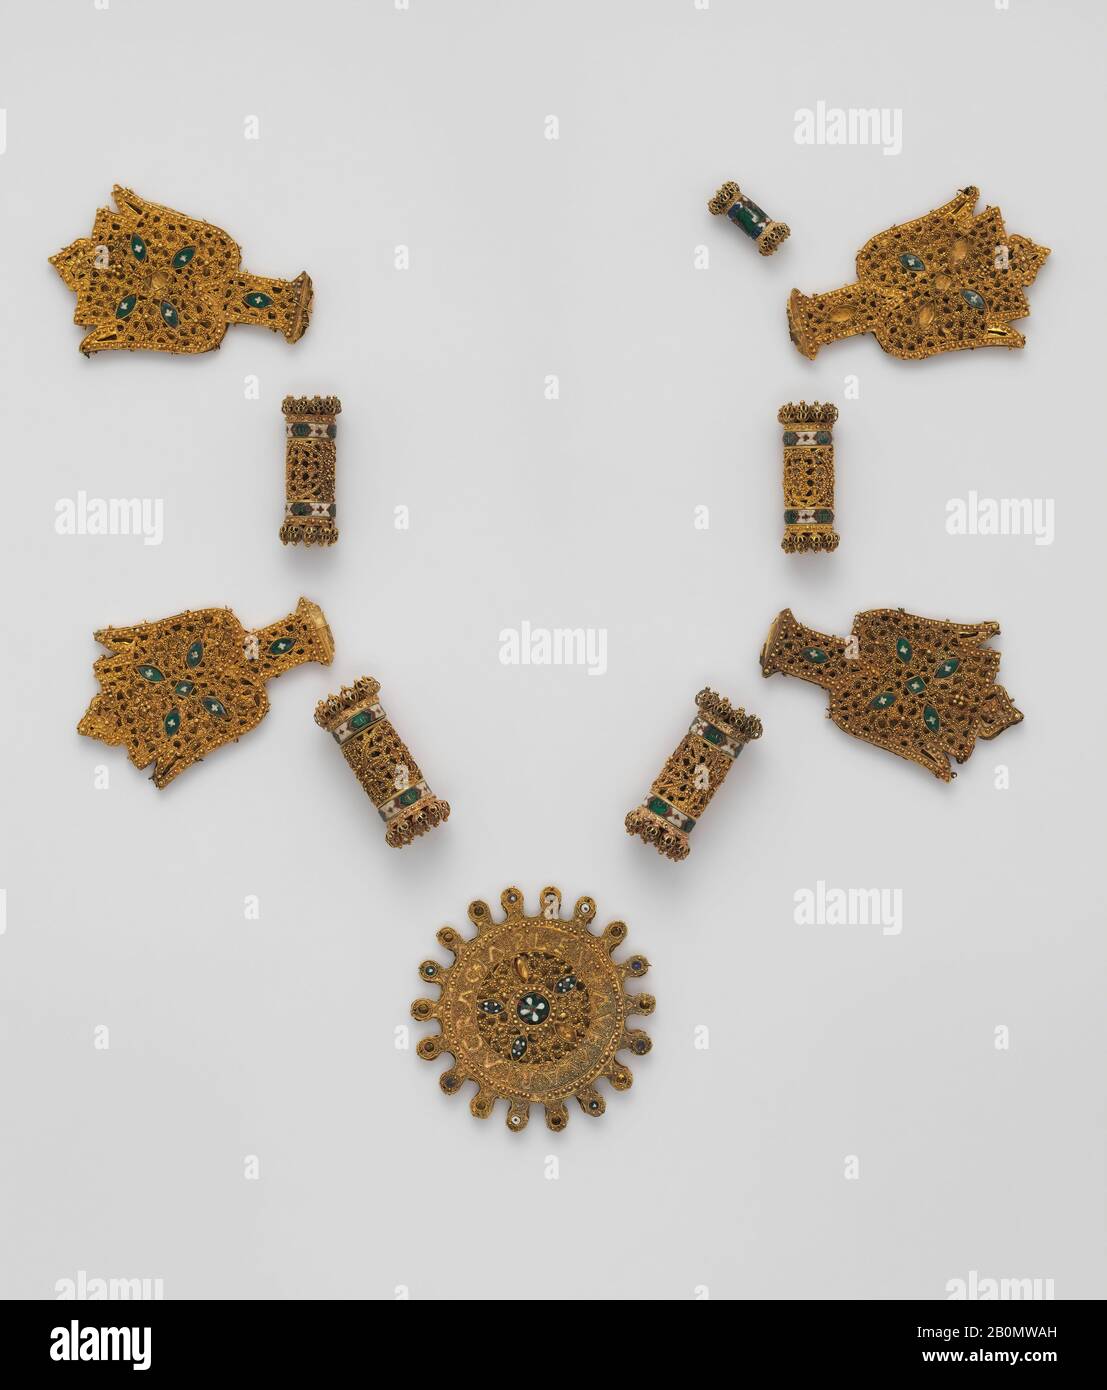 Elements from a Necklace, Spanish, late 15th–16th century, Made in Granada, Spain, Spanish, Gold, cloisonnè enamel, f:wheel shaped medallion: 3 x 3/16 in. (7.6 x 0.5 cm), b,d,j,h:4 lotus bud plaques: 3 5/16 x 2 1/16 x 3/16 in. (8.4 x 5.2 x 0.5 cm), e,g:largest cylindrical beads: 2 x 3/4 in. (5.1 x 1.9 cm), c,i:cylindrical beads: 1 7/8 x 11/16 in. (4.8 x 1.7 cm), a:smallest cylindrical bead: 1 x 1/2 in. (2.5 x 1.3 cm), Metalwork-Gold Stock Photo